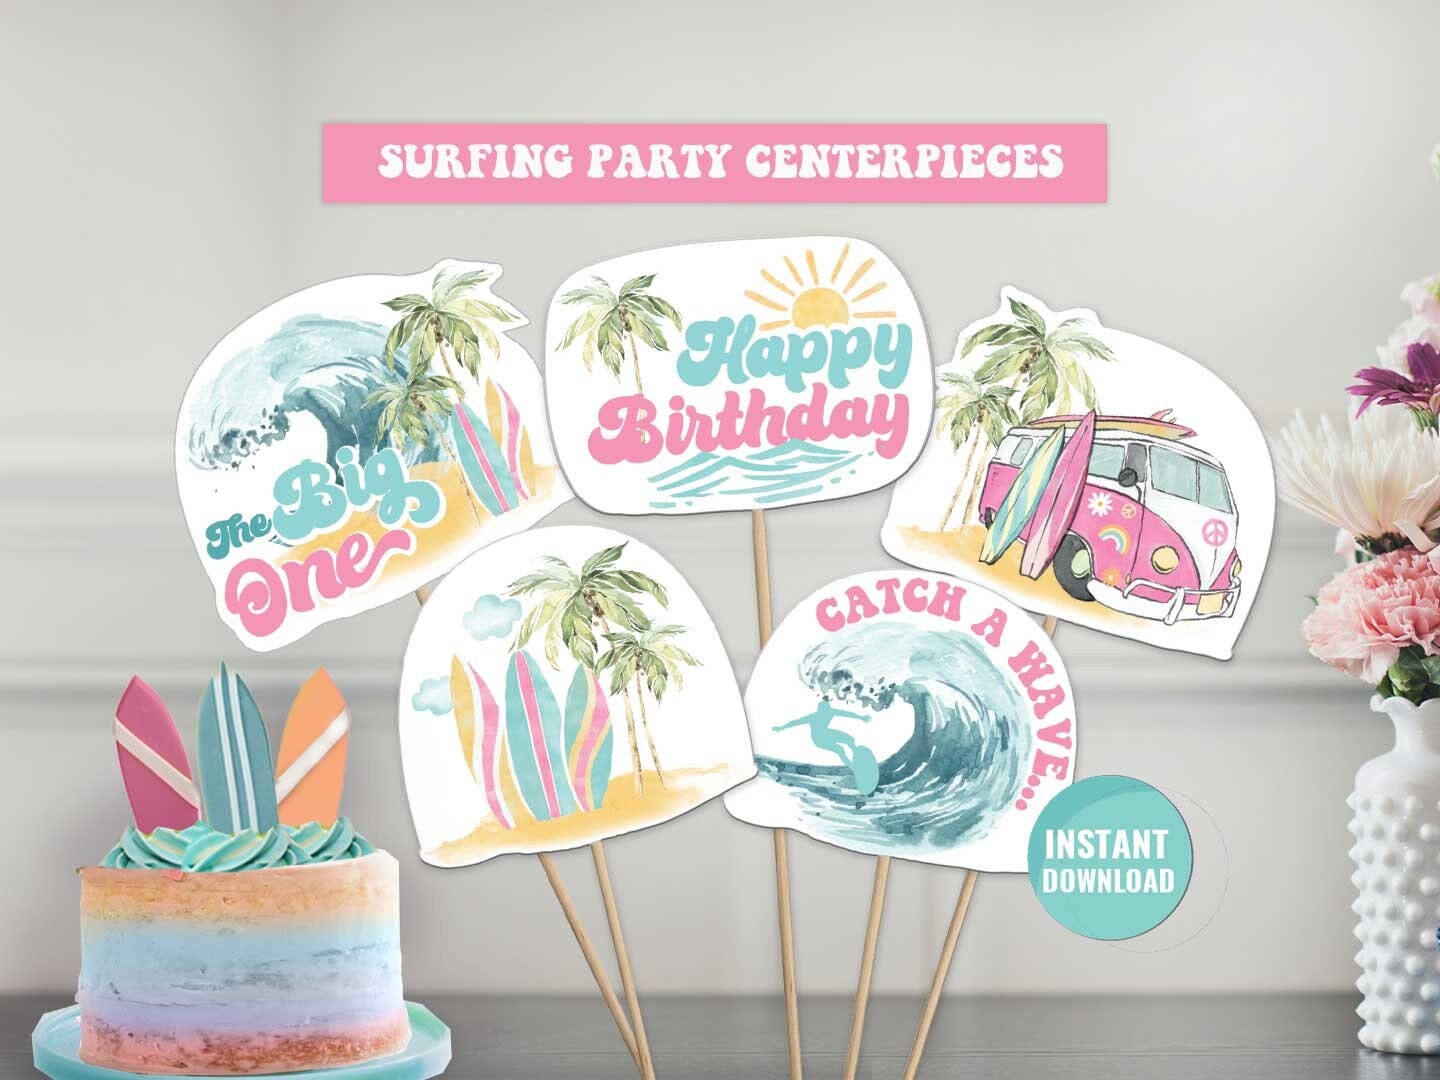 Catch a Wave this Summer with these Surfer-Themed First Birthday